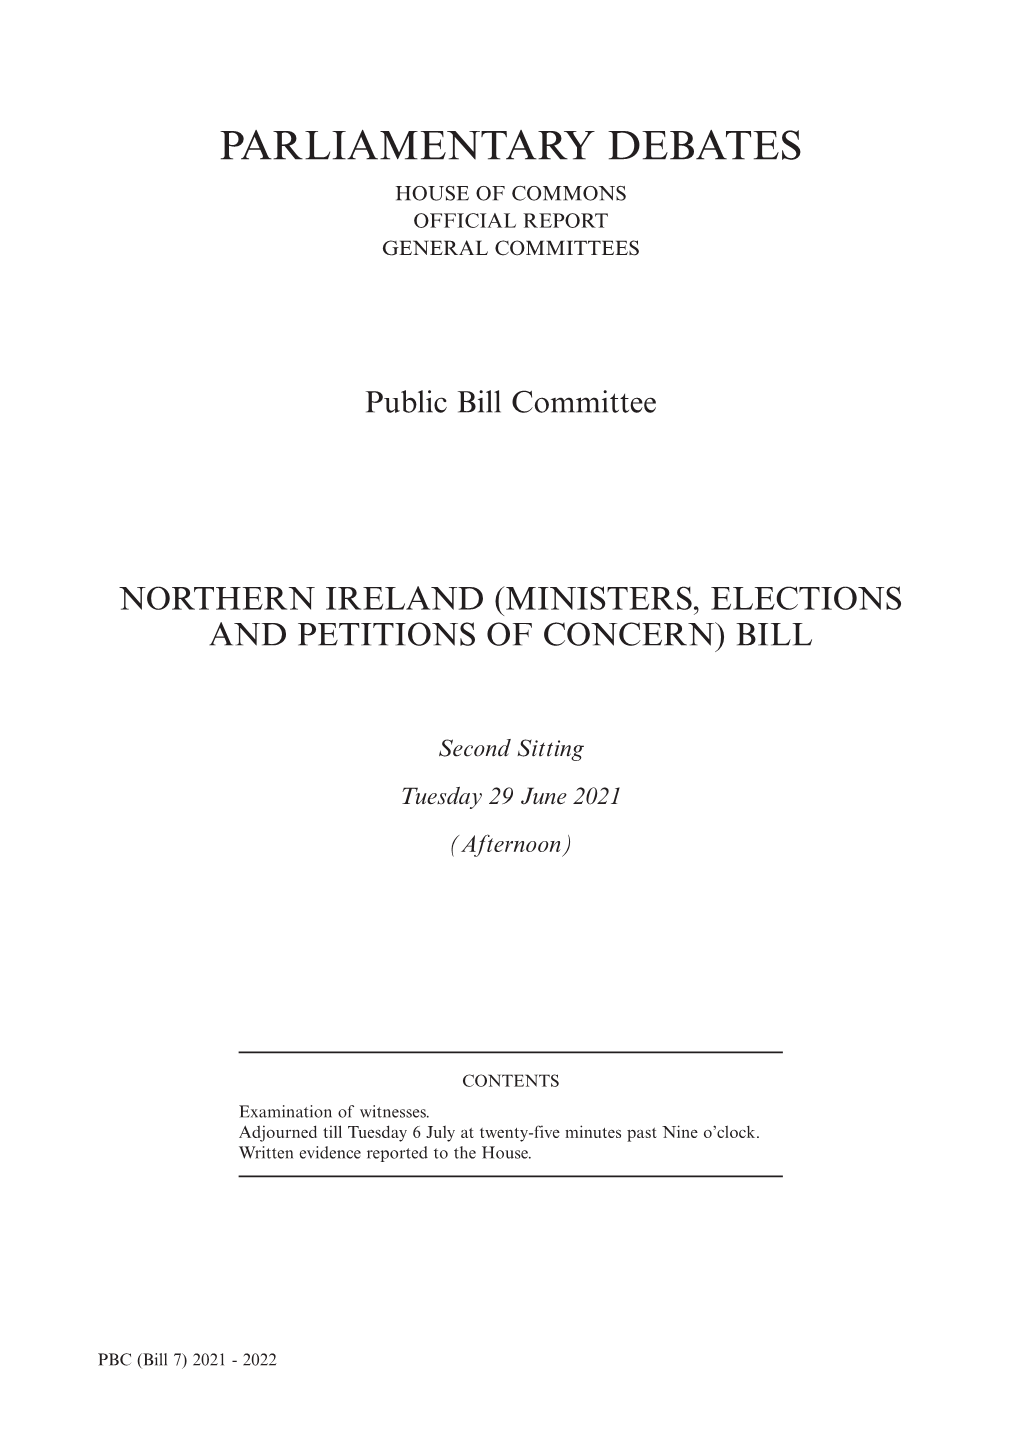 Northern Ireland (Ministers, Elections and Petitions of Concern) Bill